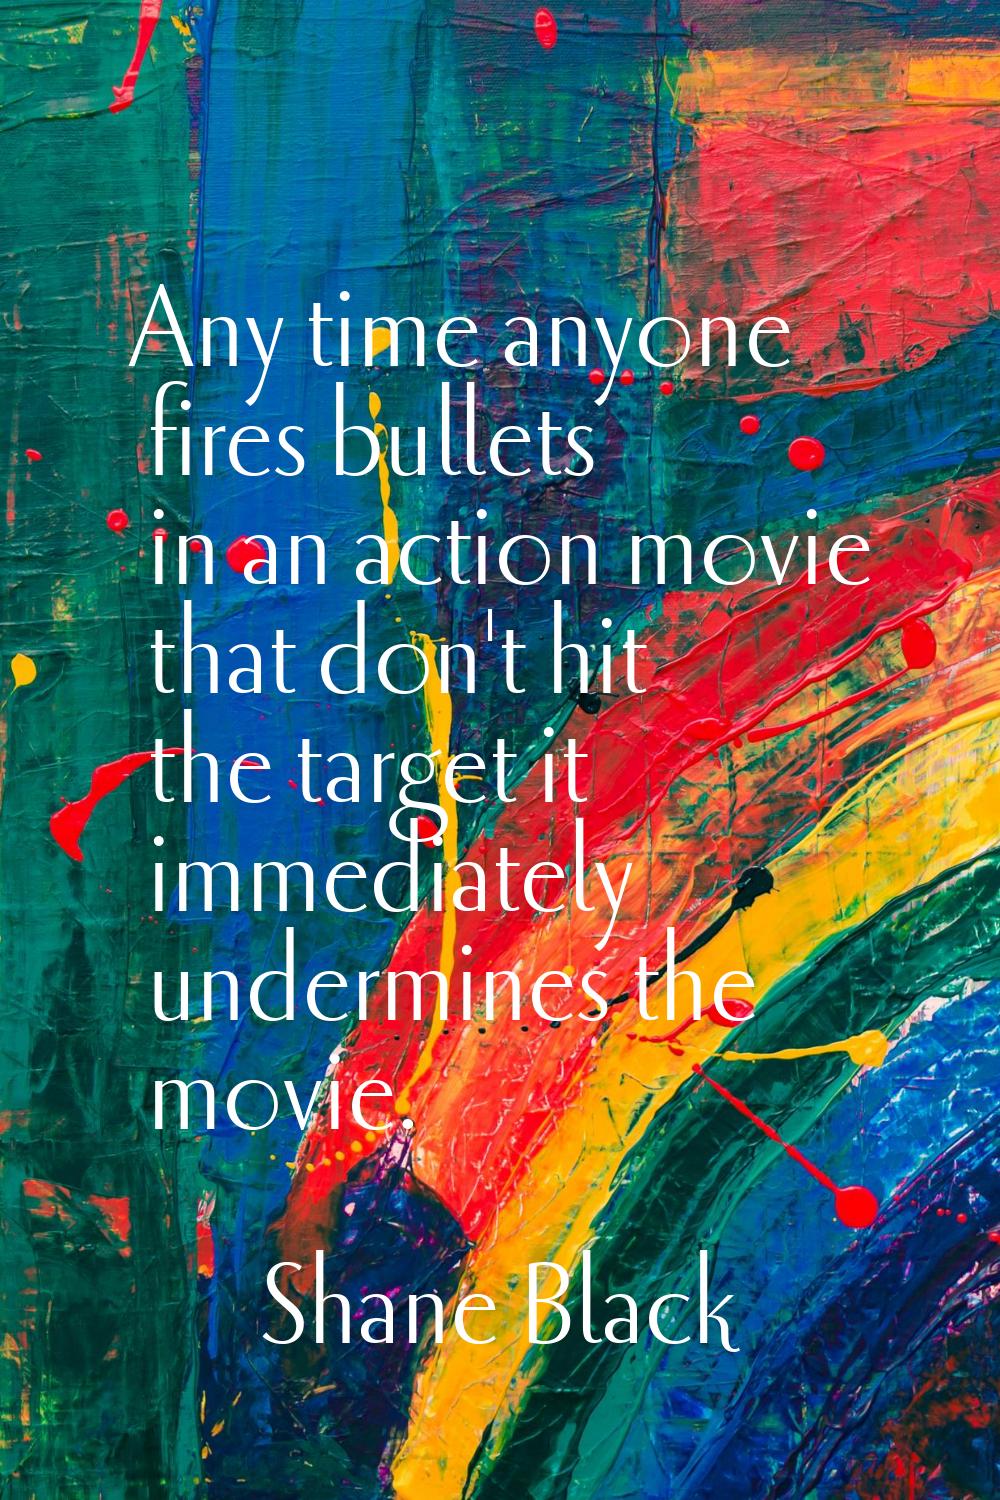 Any time anyone fires bullets in an action movie that don't hit the target it immediately undermine